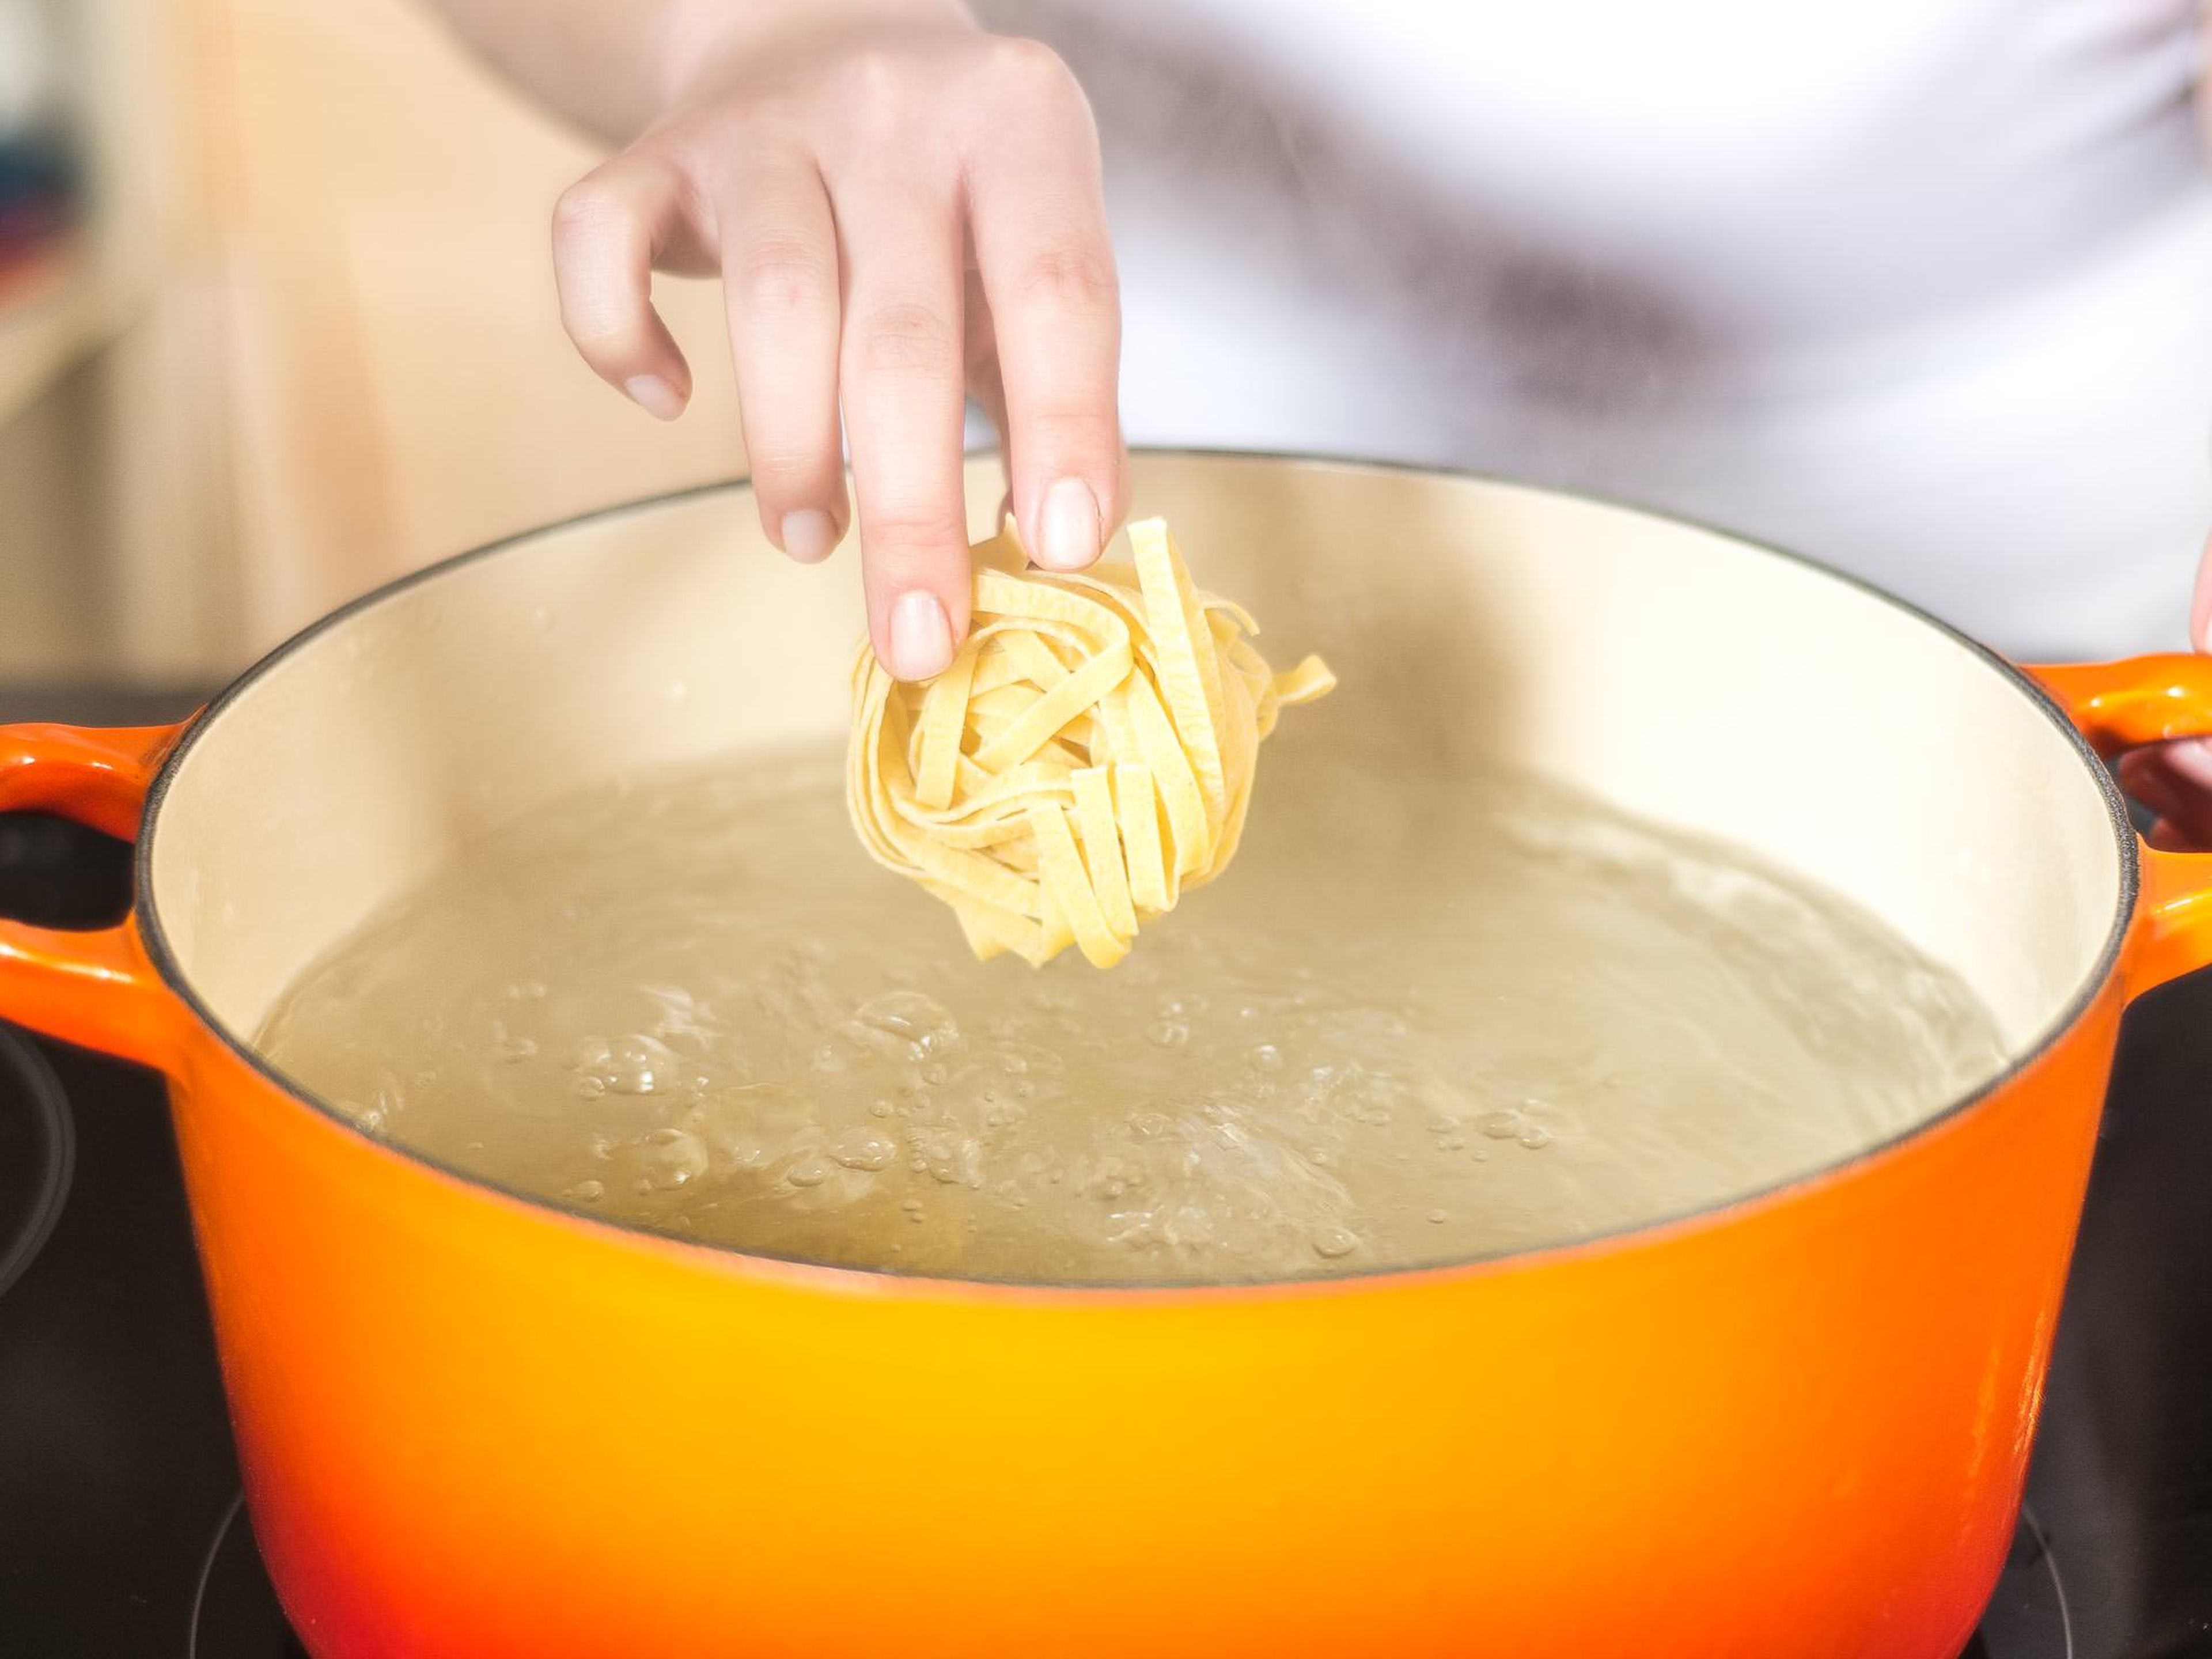 Now cook tagliatelle in salted boiling water, according to package instructions, until al dente. Then strain the water and set aside.